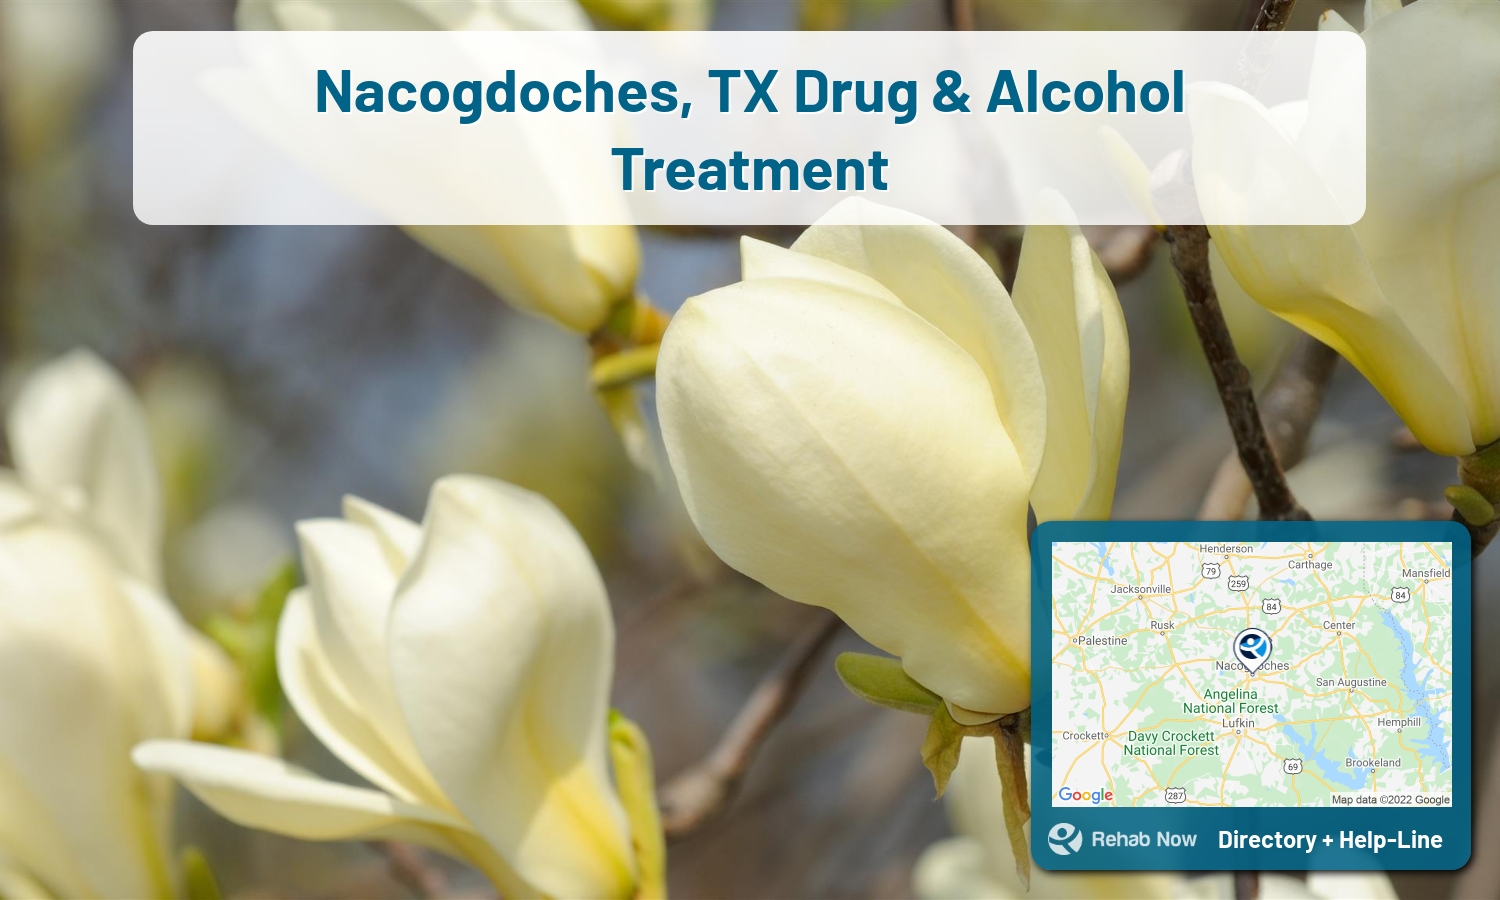 Nacogdoches, TX Treatment Centers. Find drug rehab in Nacogdoches, Texas, or detox and treatment programs. Get the right help now!